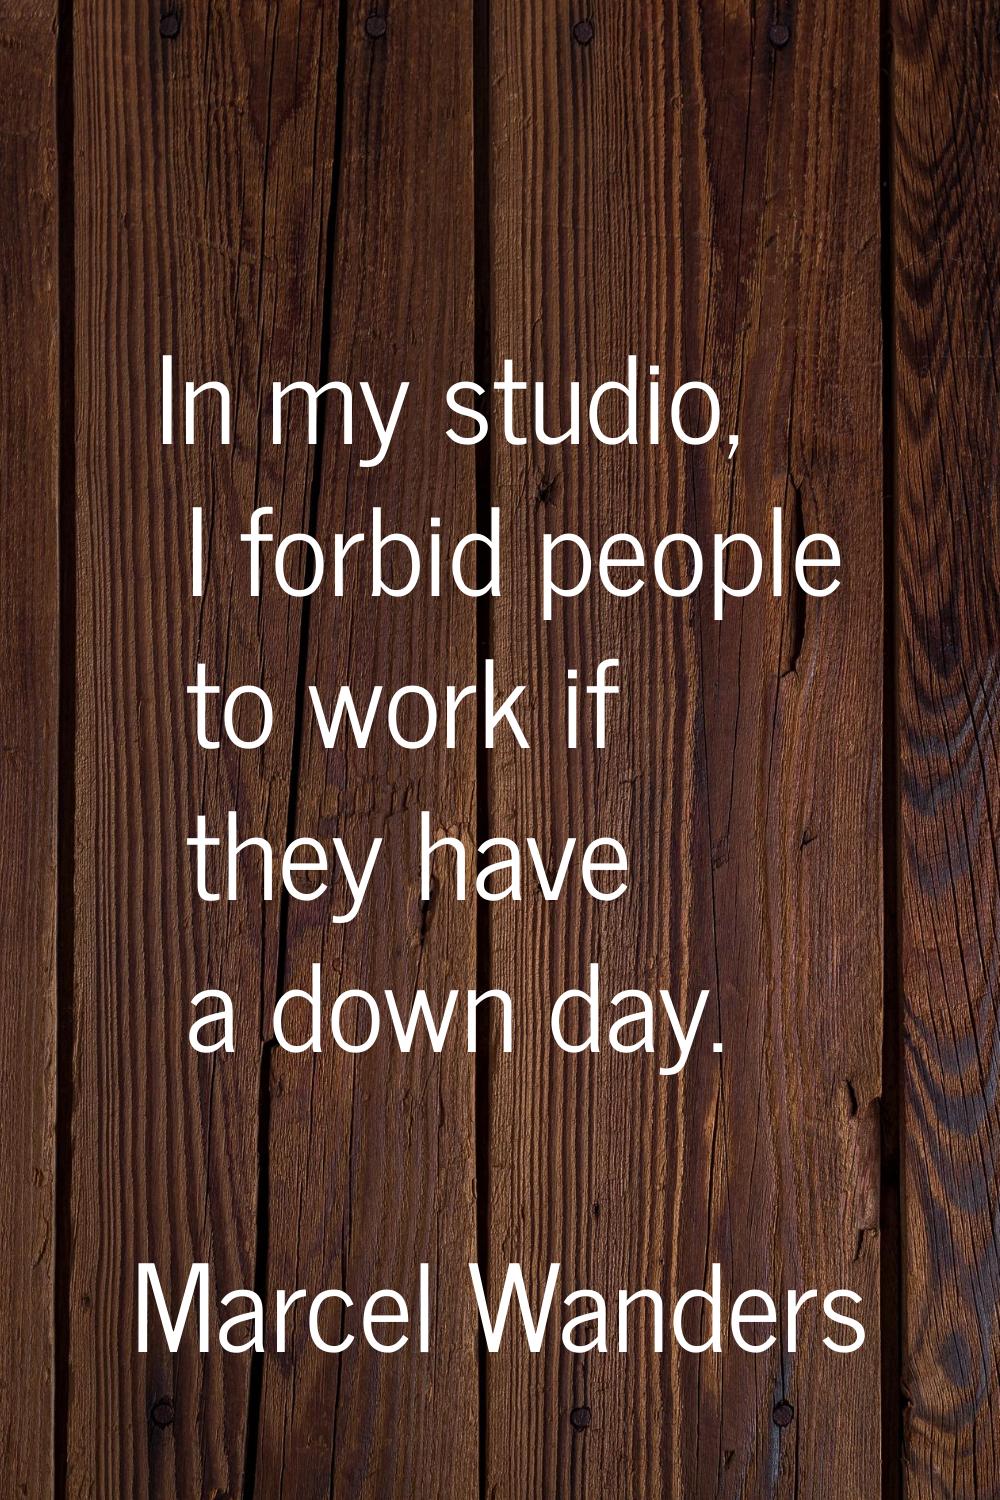 In my studio, I forbid people to work if they have a down day.